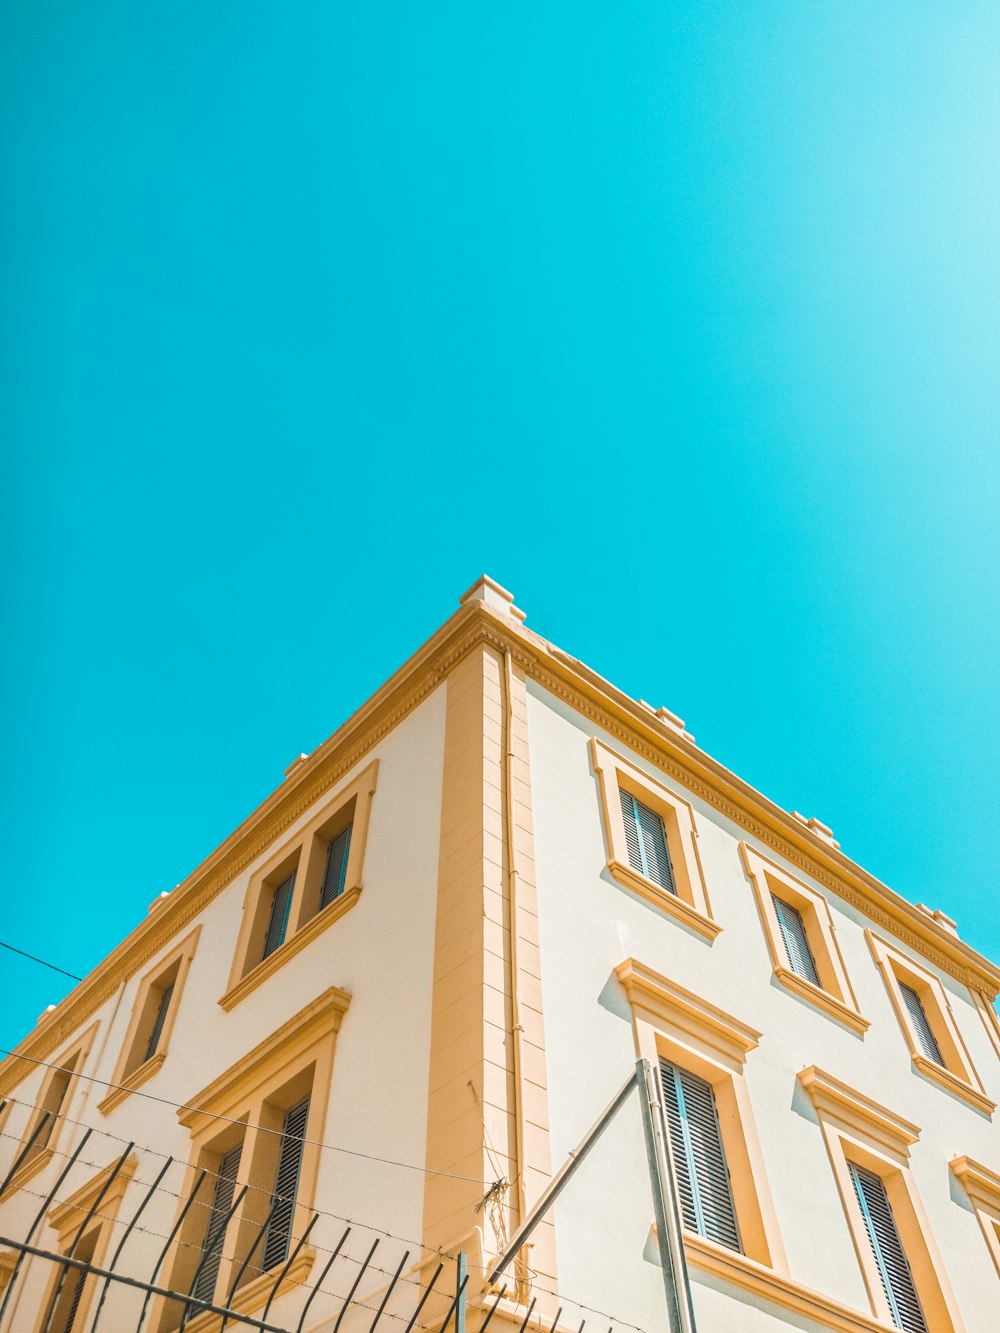 worm's-eye view photography of yellow and brown concrete house under clear sky